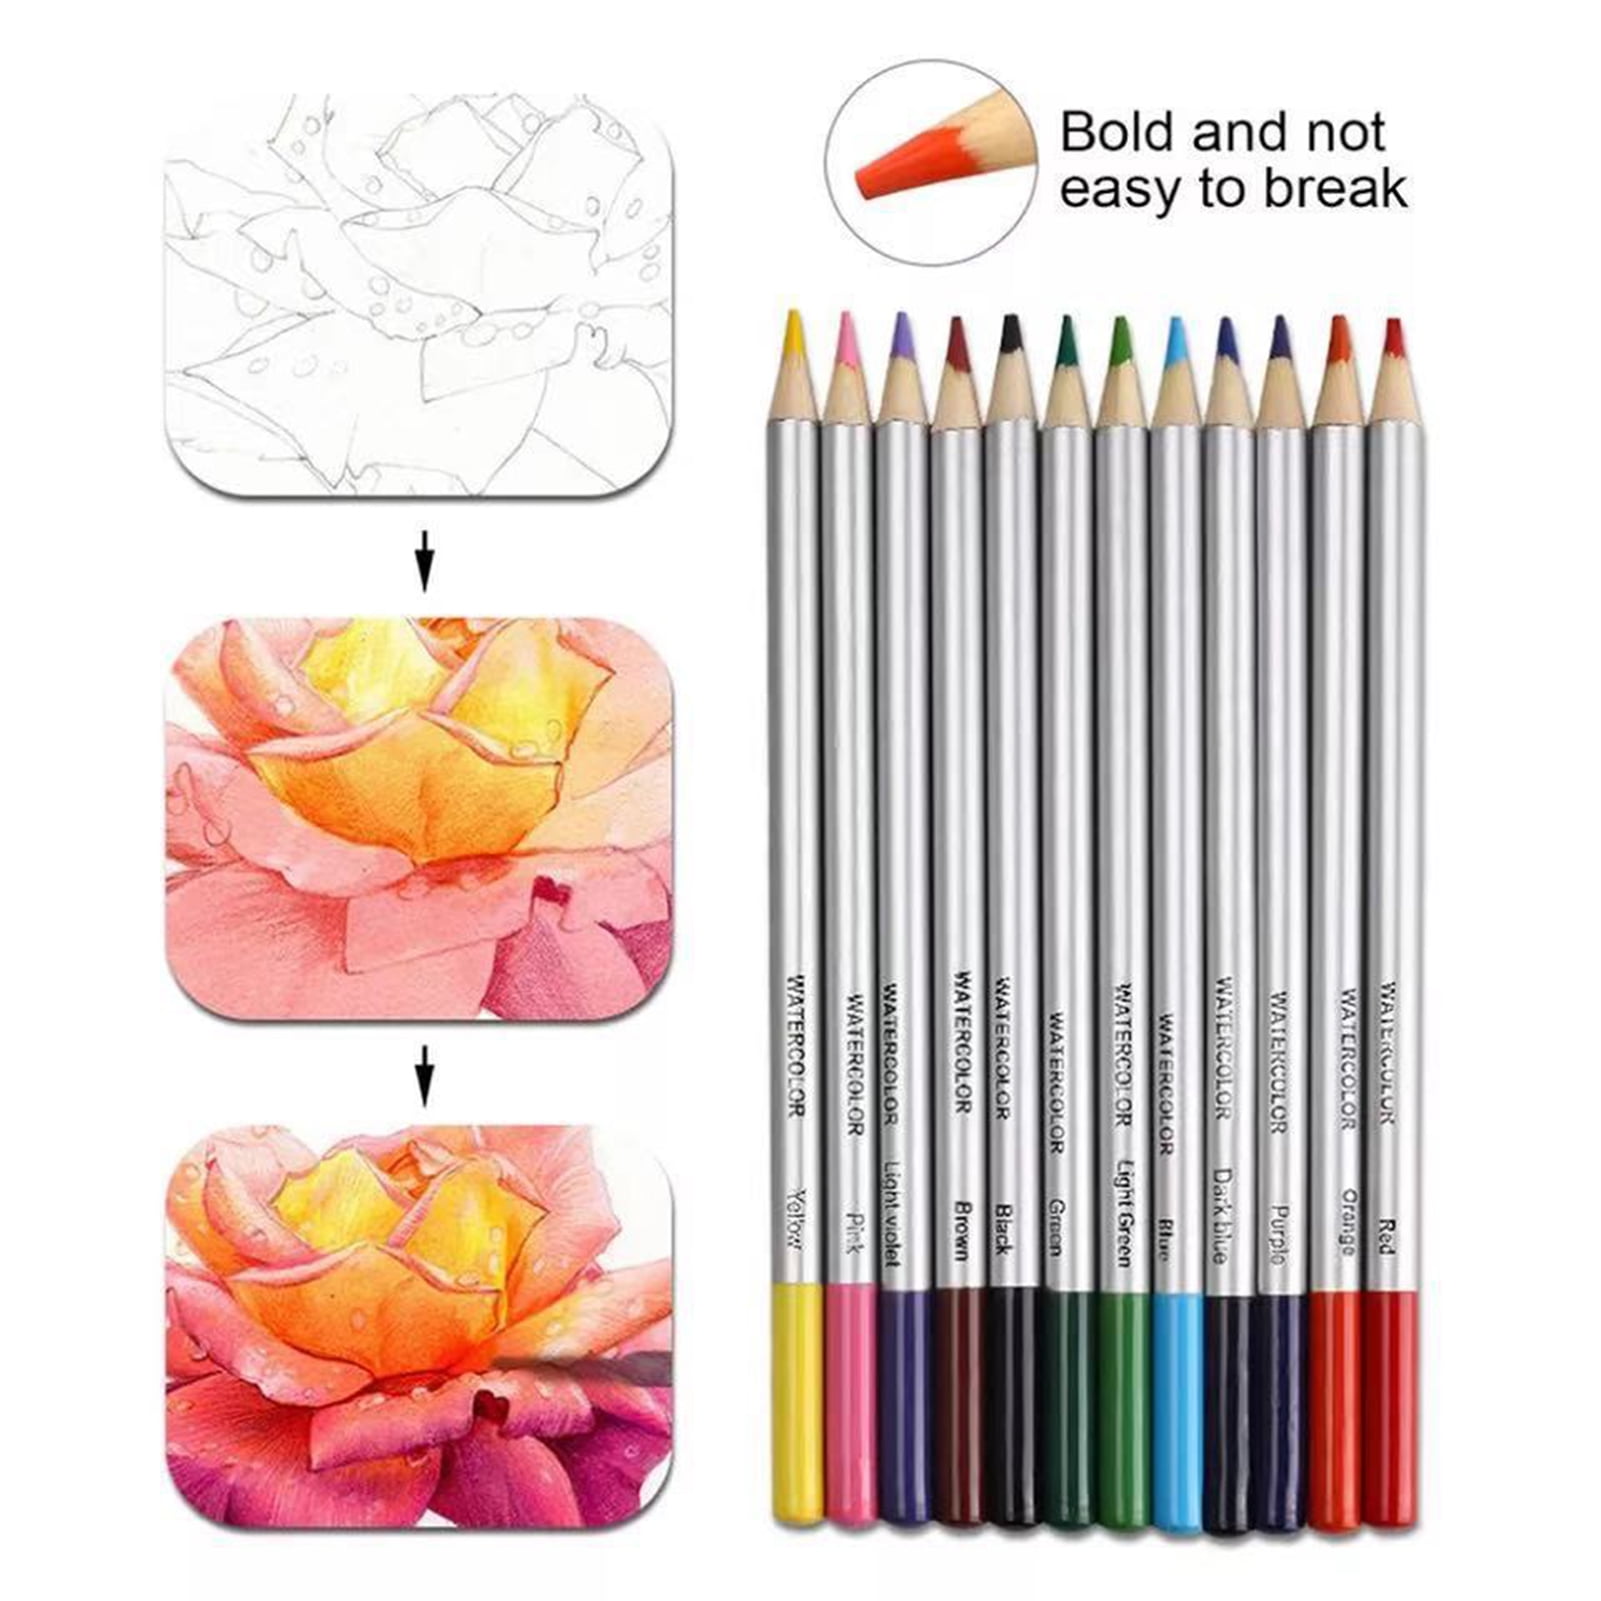 YOOUSOO Colouring Pencils,36 Pcs Professional Coloured Pencils Drawing  Pencils, Oil-based Artist Pencil Set, No Wax, Ideal for Sketching,  Doodling